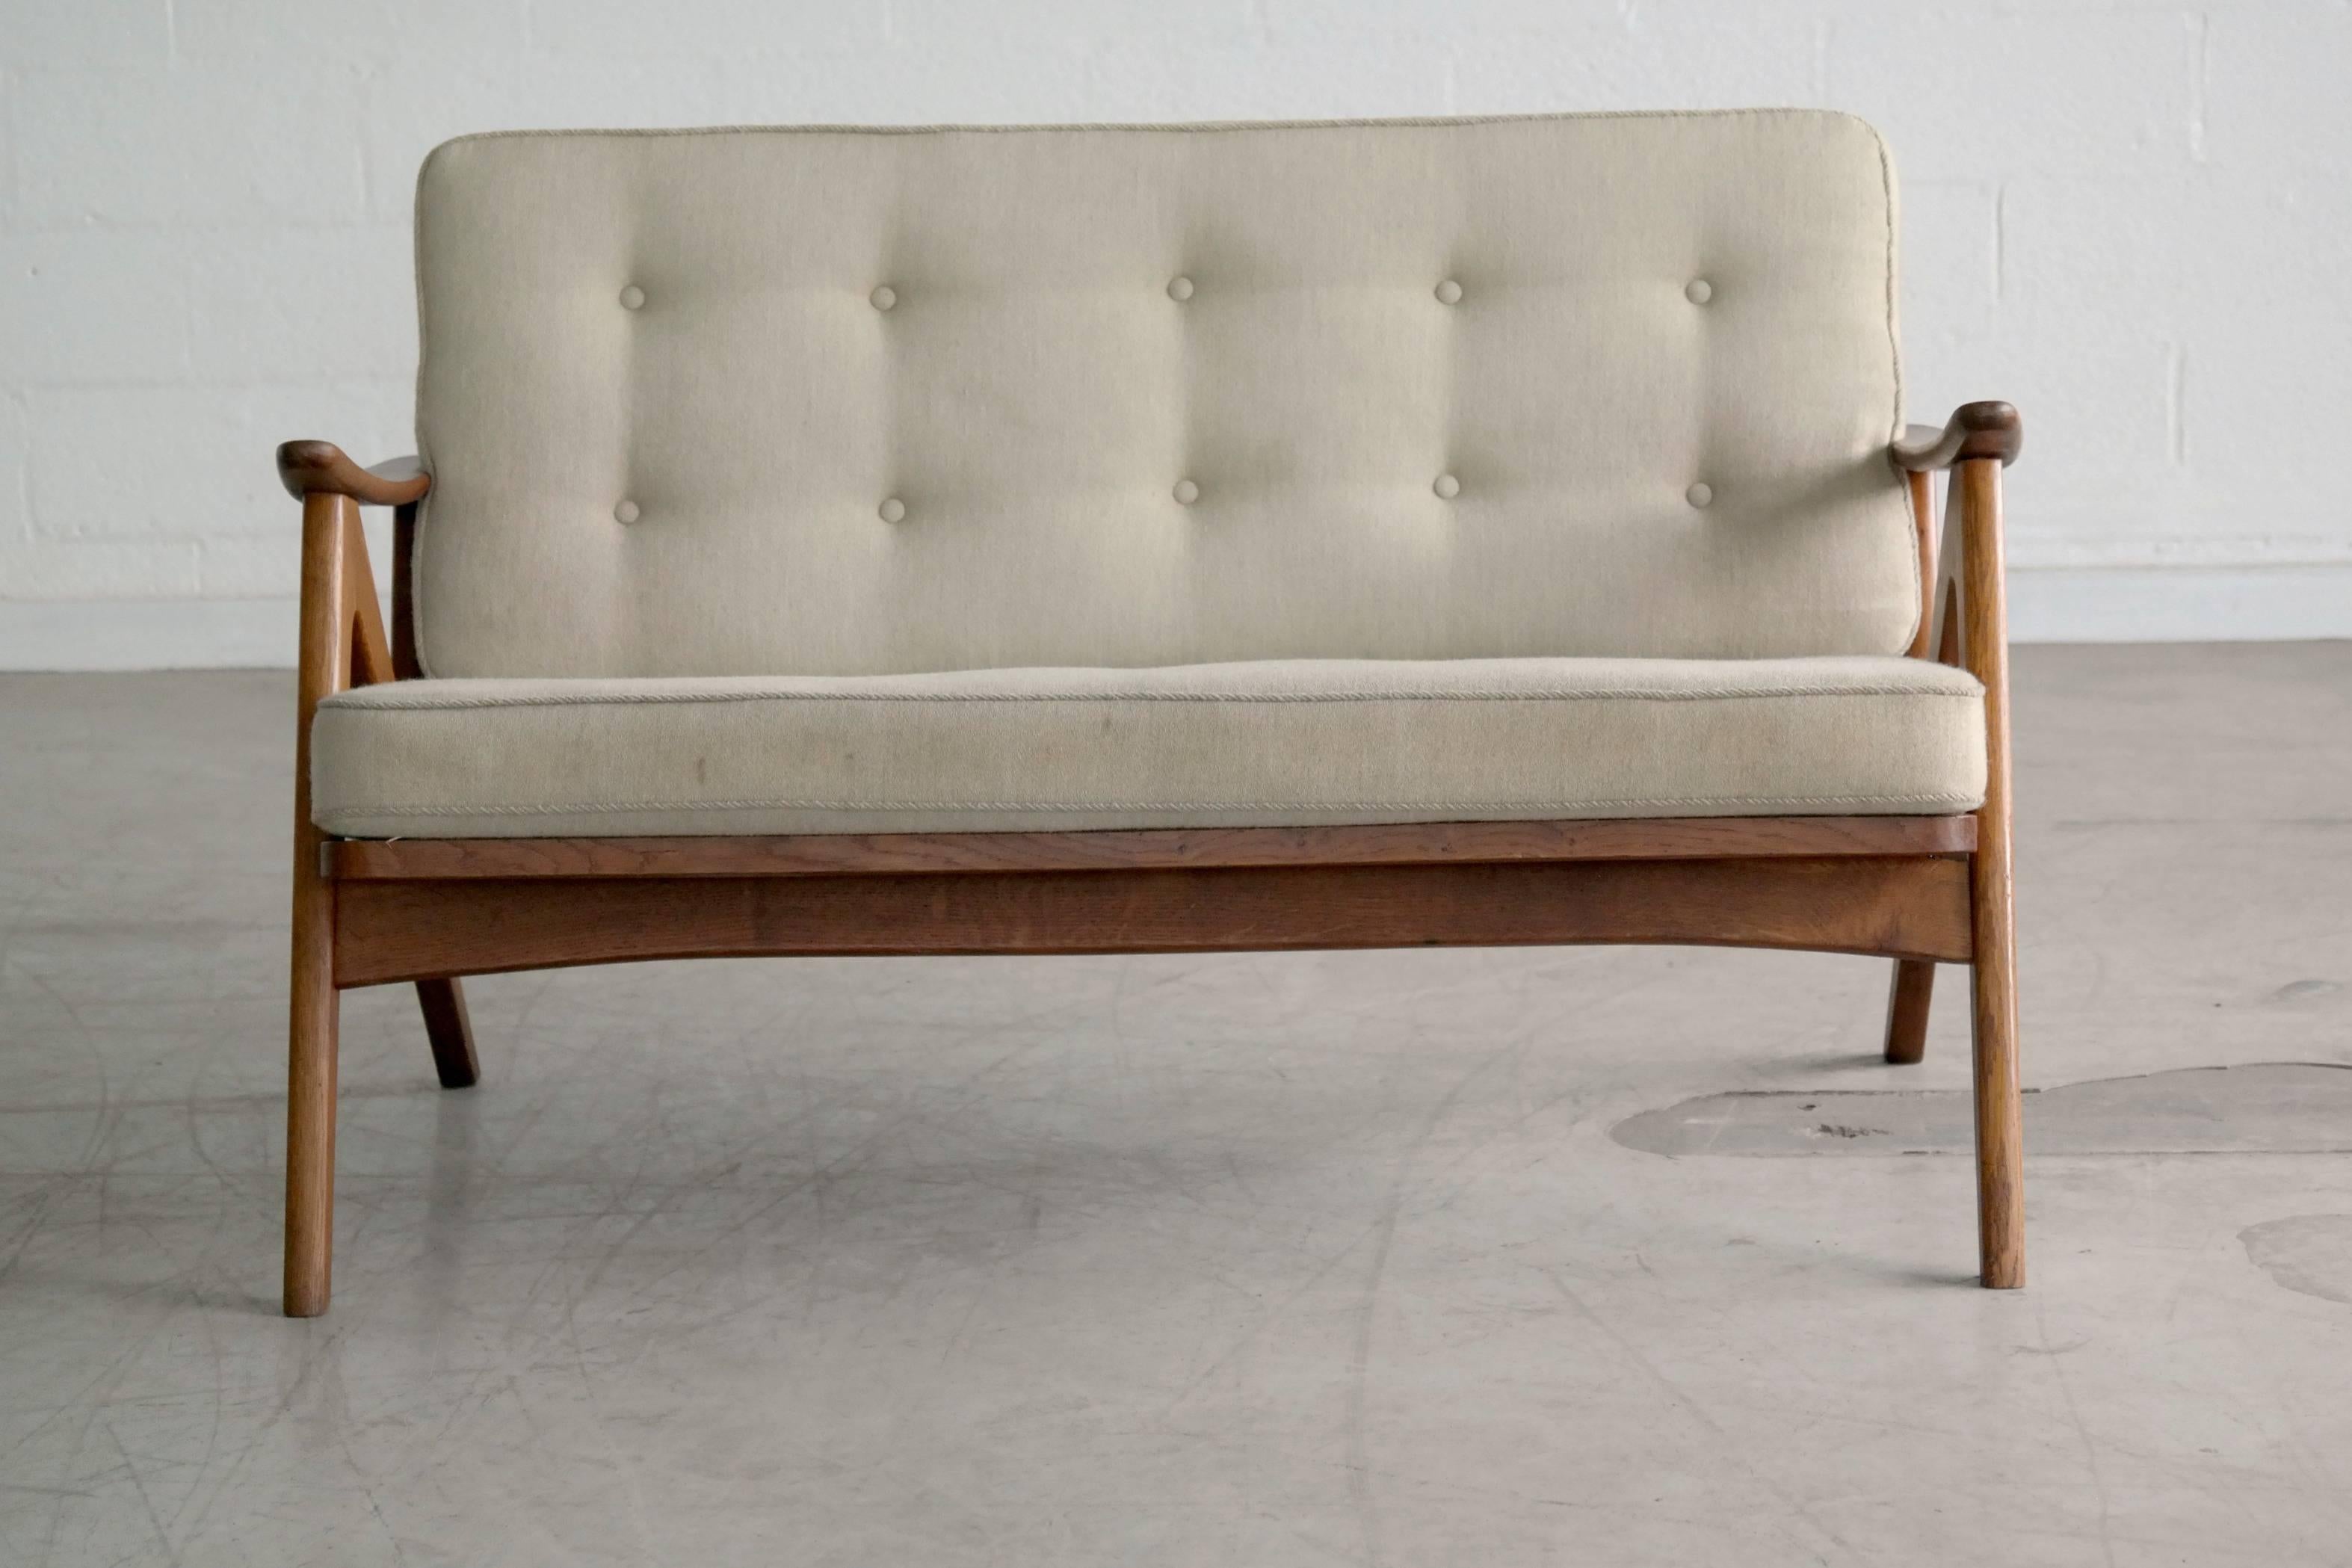 Great 1960s easy style sofa in the style of Hovman-Olsen. Smaller proportions more like a love seat with two long cushions instead of the individual cushions often used on easy sofas. All solid teak with wool upholstery.